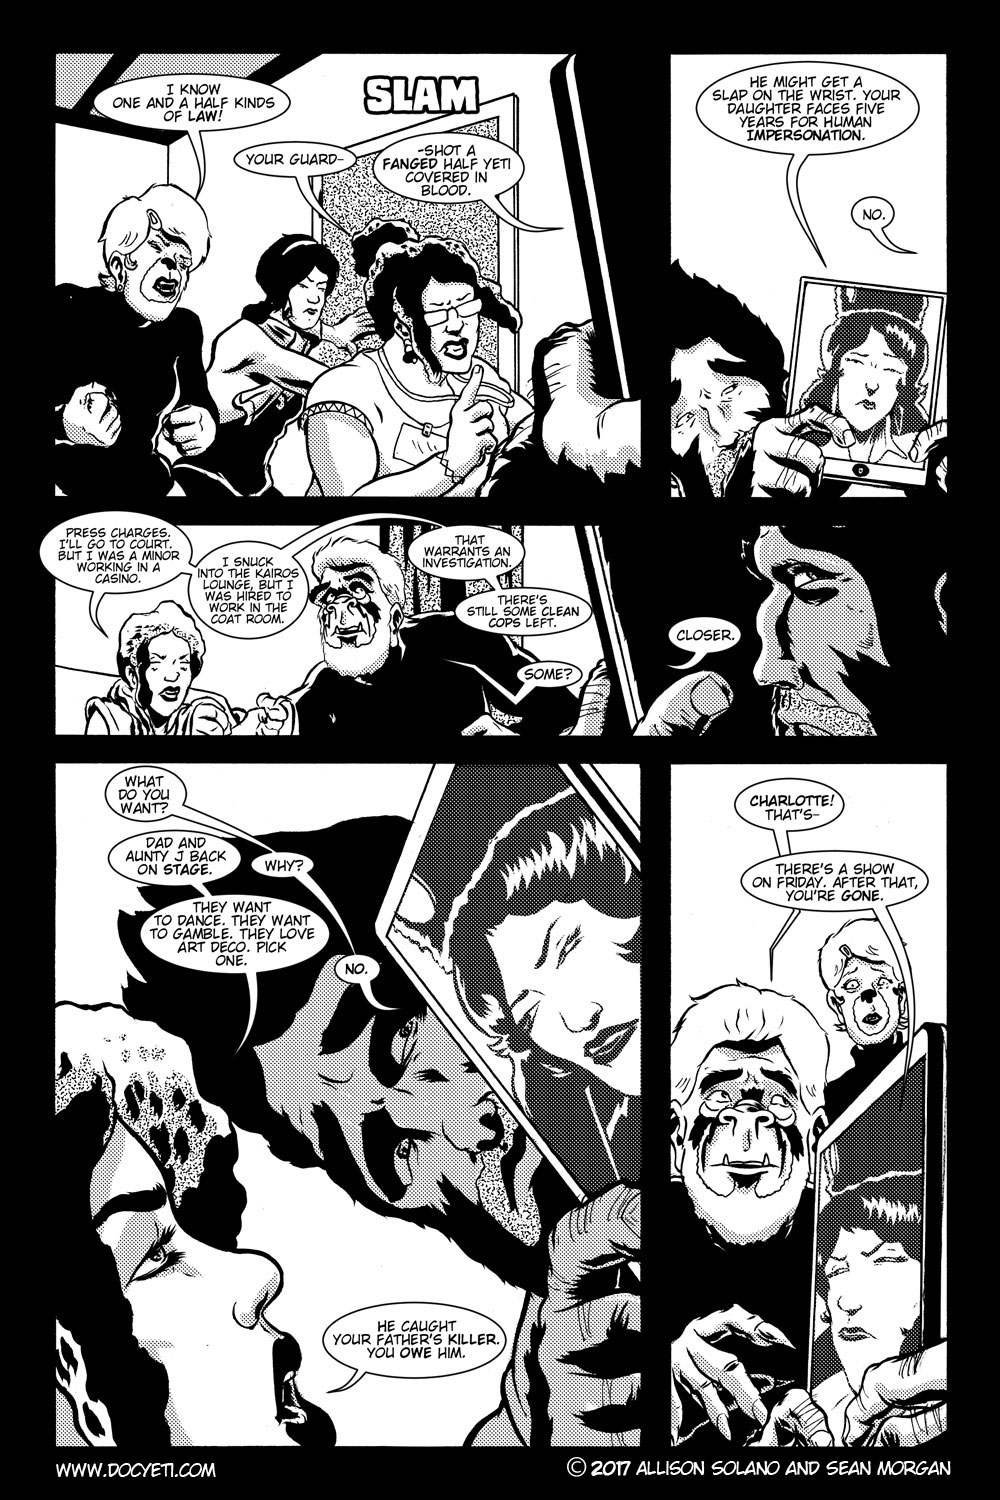 This Yeti for Hire! or the Yeti with the Lace Kerchief! Issue 3 pg.07